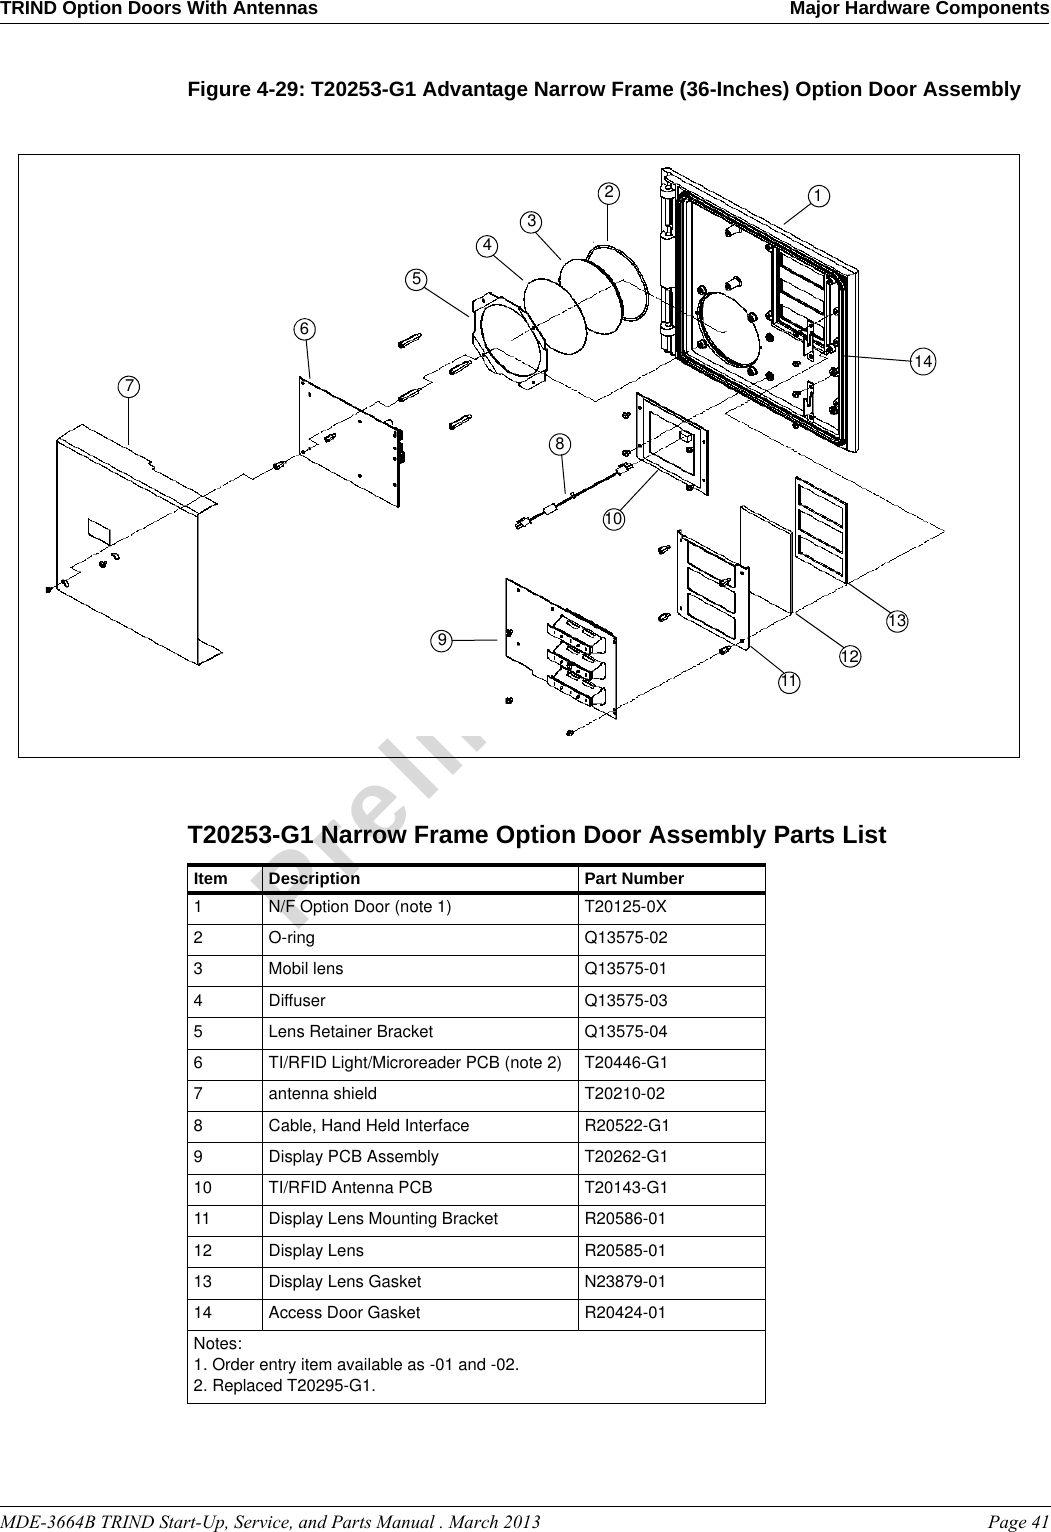 MDE-3664B TRIND Start-Up, Service, and Parts Manual . March 2013 Page 41TRIND Option Doors With Antennas Major Hardware ComponentsPreliminaryFigure 4-29: T20253-G1 Advantage Narrow Frame (36-Inches) Option Door Assembly2134567910111213814T20253-G1 Narrow Frame Option Door Assembly Parts ListItem Description Part Number1N/F Option Door (note 1) T20125-0X2O-ring Q13575-023Mobil lens Q13575-014Diffuser Q13575-035Lens Retainer Bracket Q13575-046TI/RFID Light/Microreader PCB (note 2) T20446-G17antenna shield T20210-028Cable, Hand Held Interface R20522-G19Display PCB Assembly T20262-G110 TI/RFID Antenna PCB T20143-G111 Display Lens Mounting Bracket R20586-0112 Display Lens R20585-0113 Display Lens Gasket N23879-0114 Access Door Gasket R20424-01Notes:1. Order entry item available as -01 and -02.2. Replaced T20295-G1.